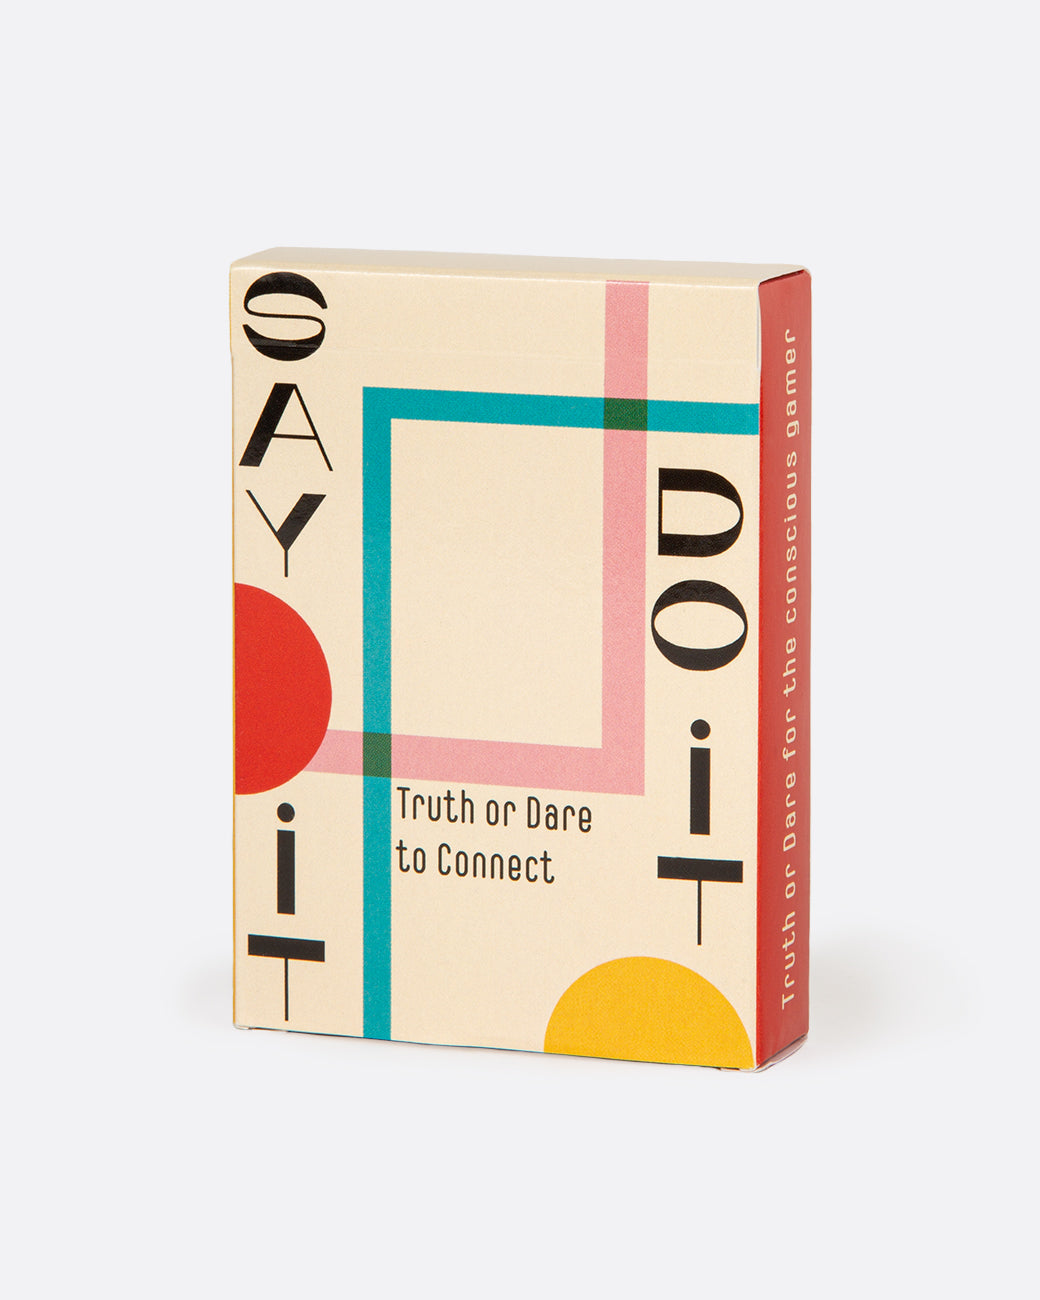 Say Do It card game in its packaging